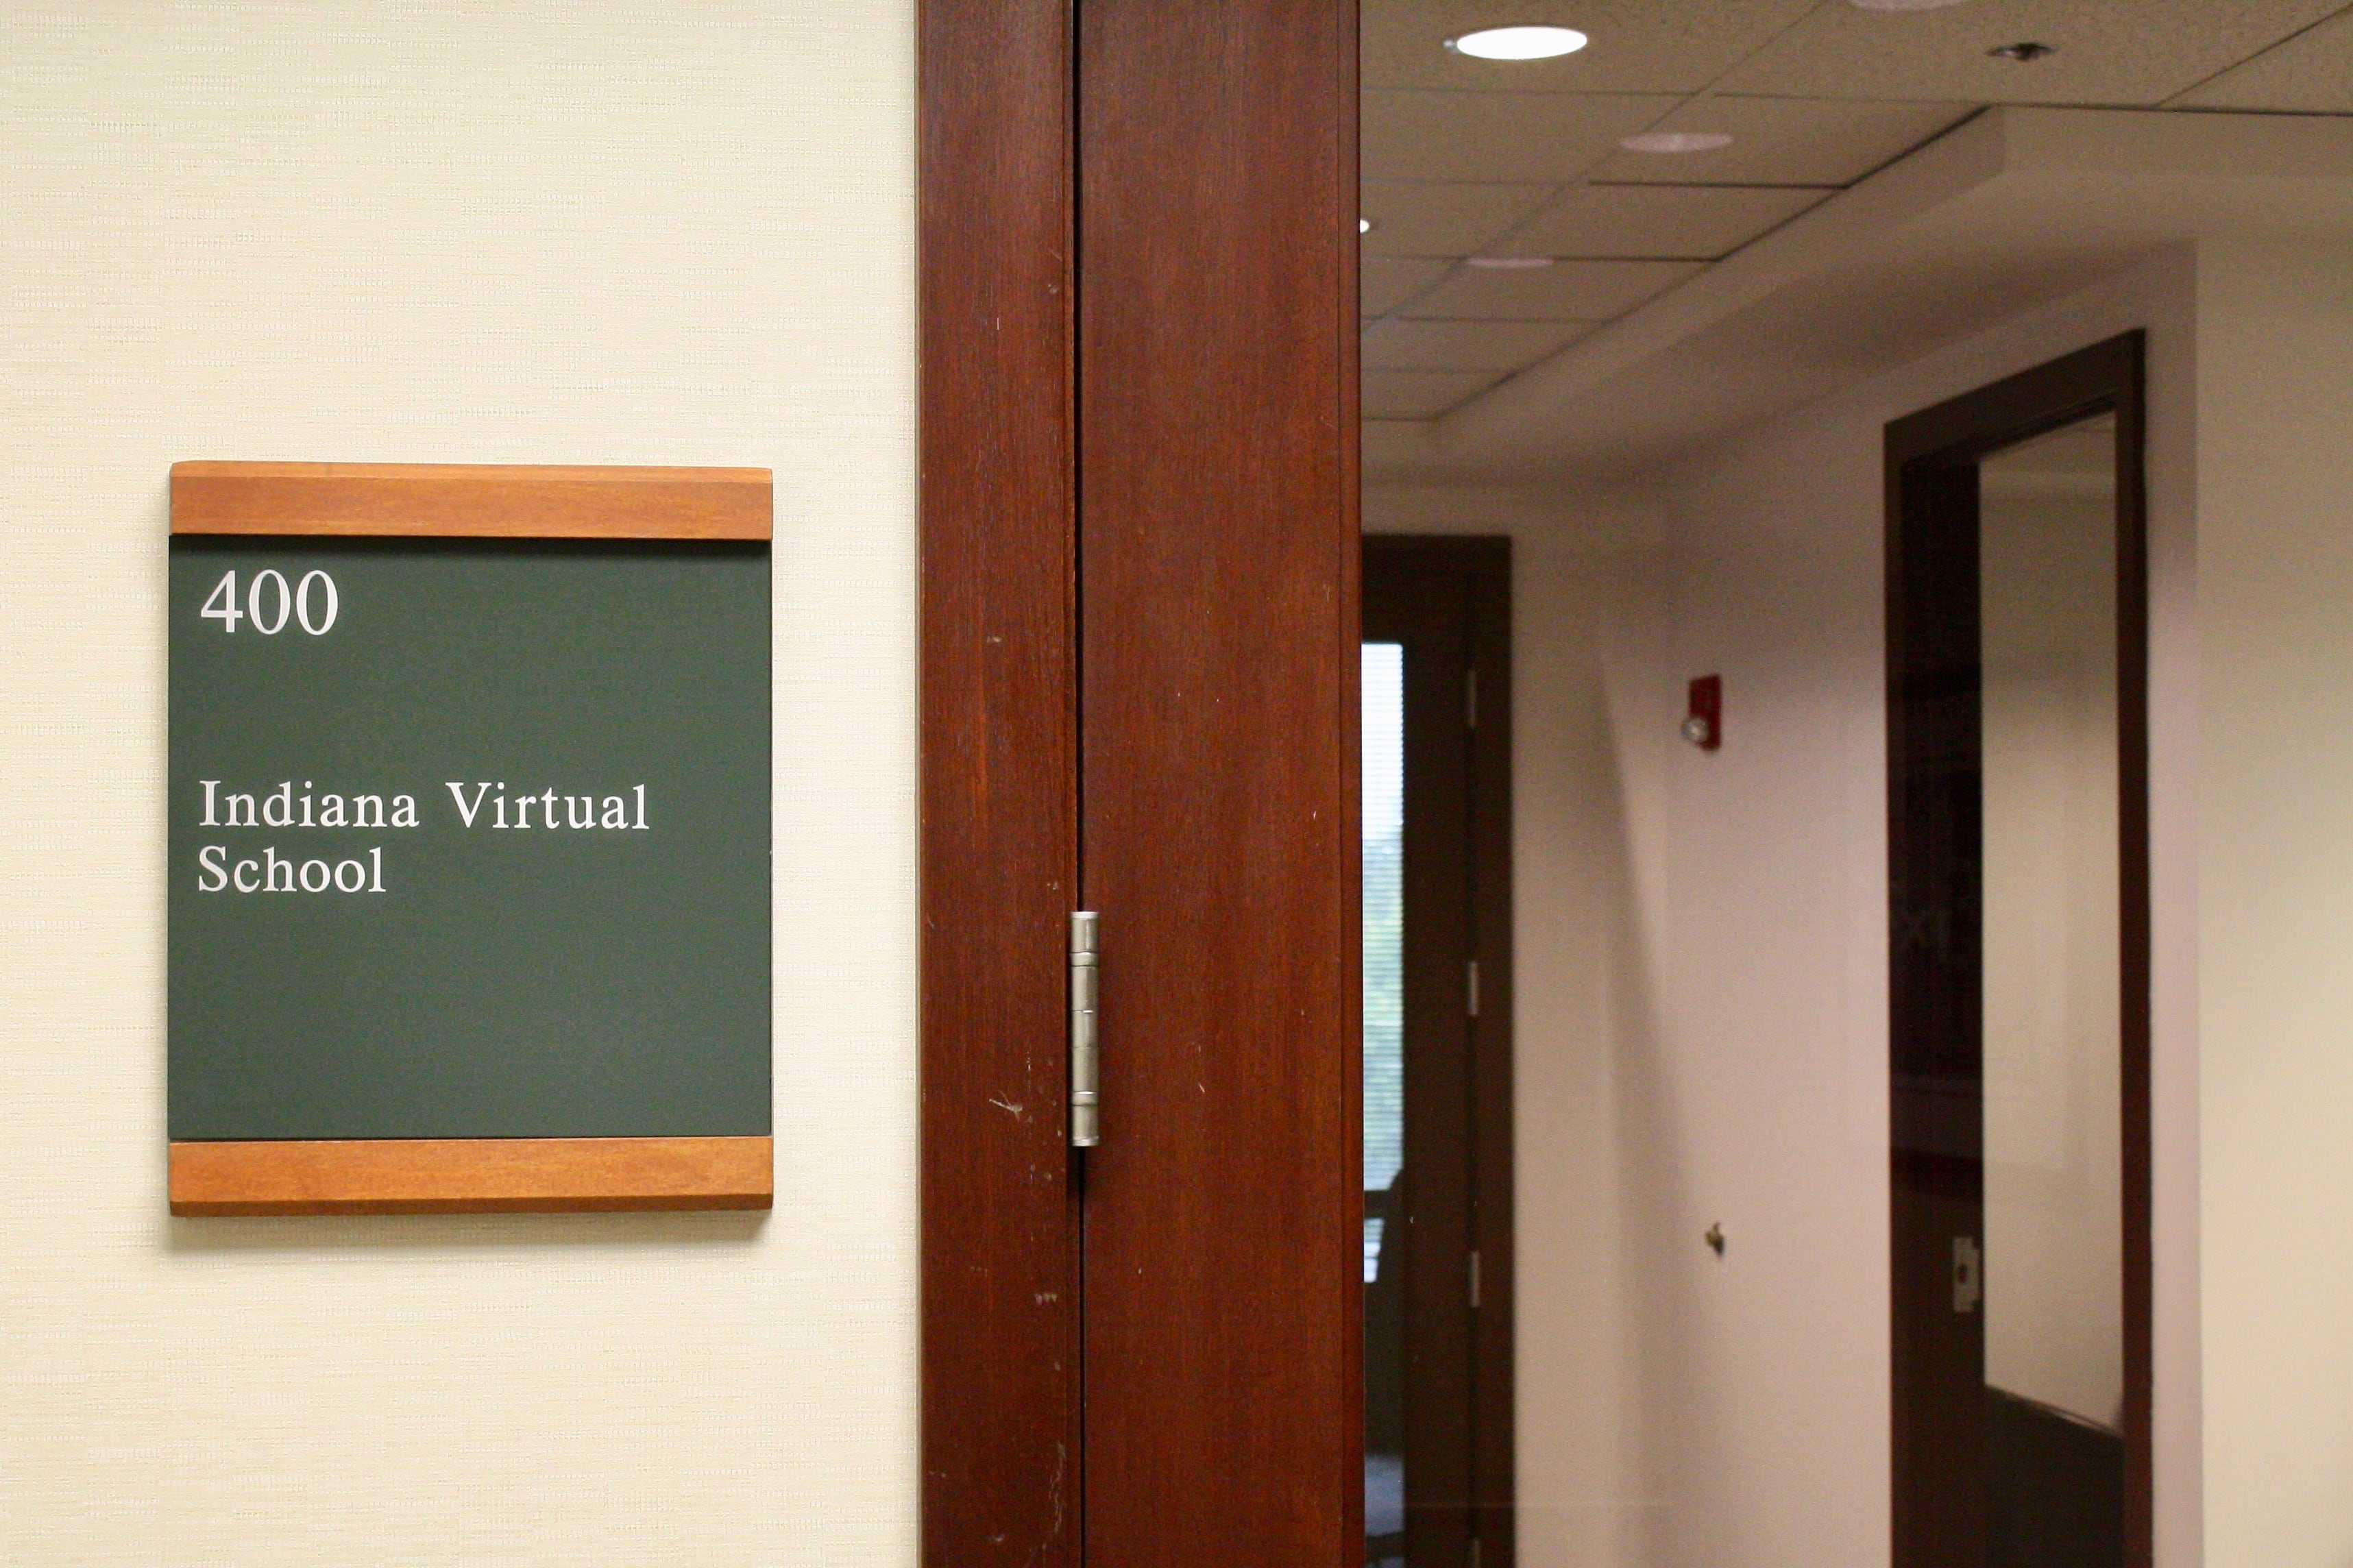 A small office sign that reads "Indiana Virtual School" is next to a door with a glass front.